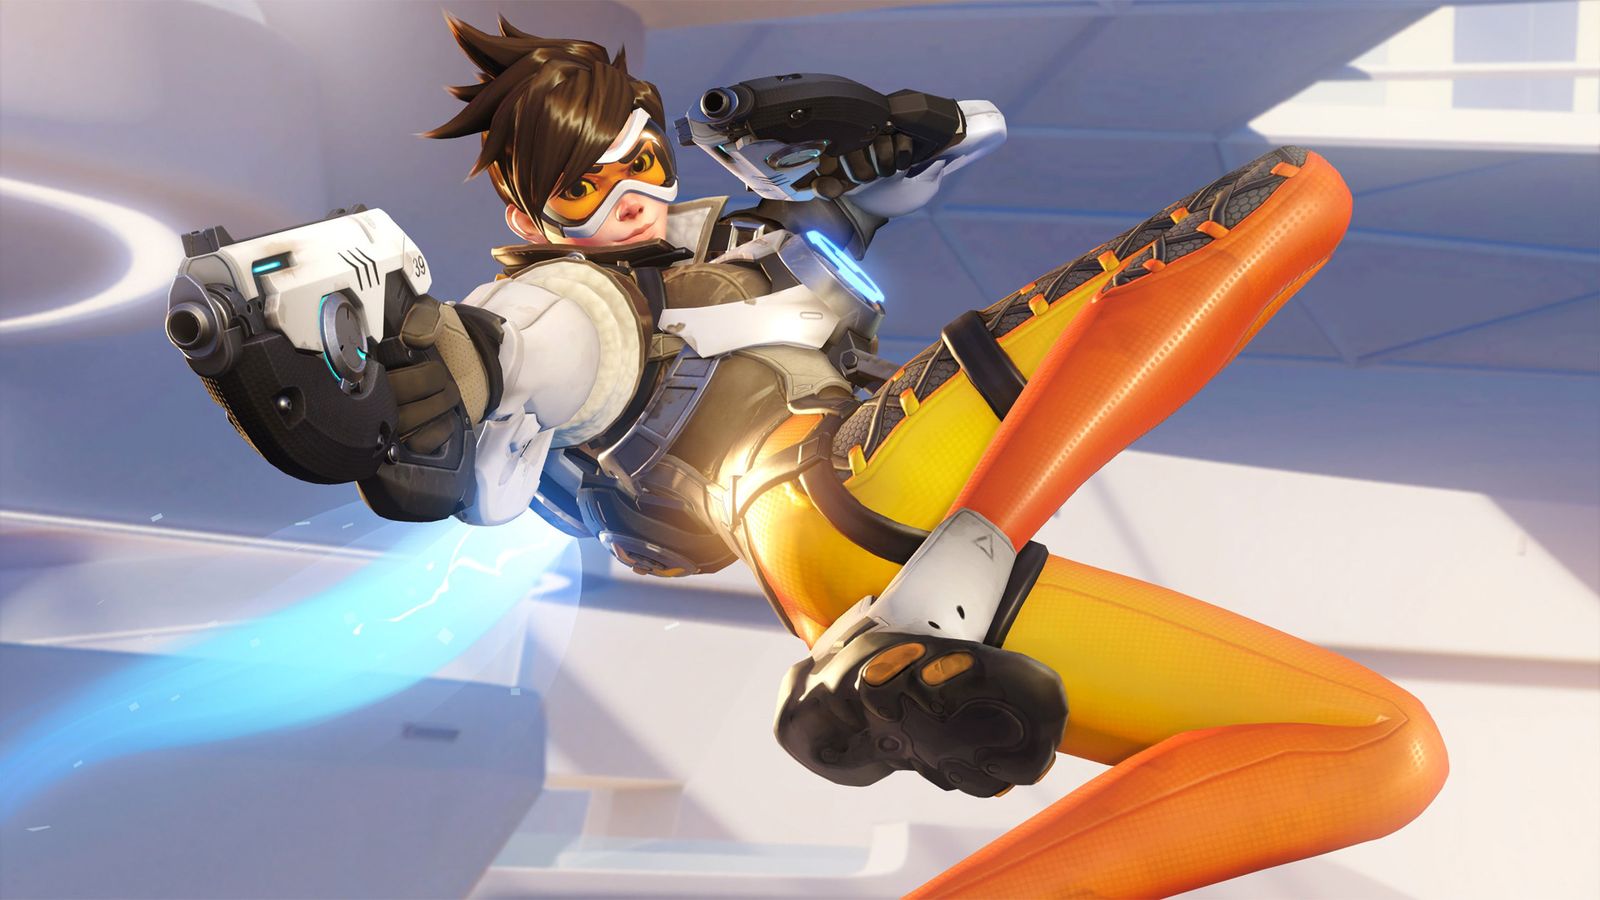 Tracer (and her butt) from Overwatch.